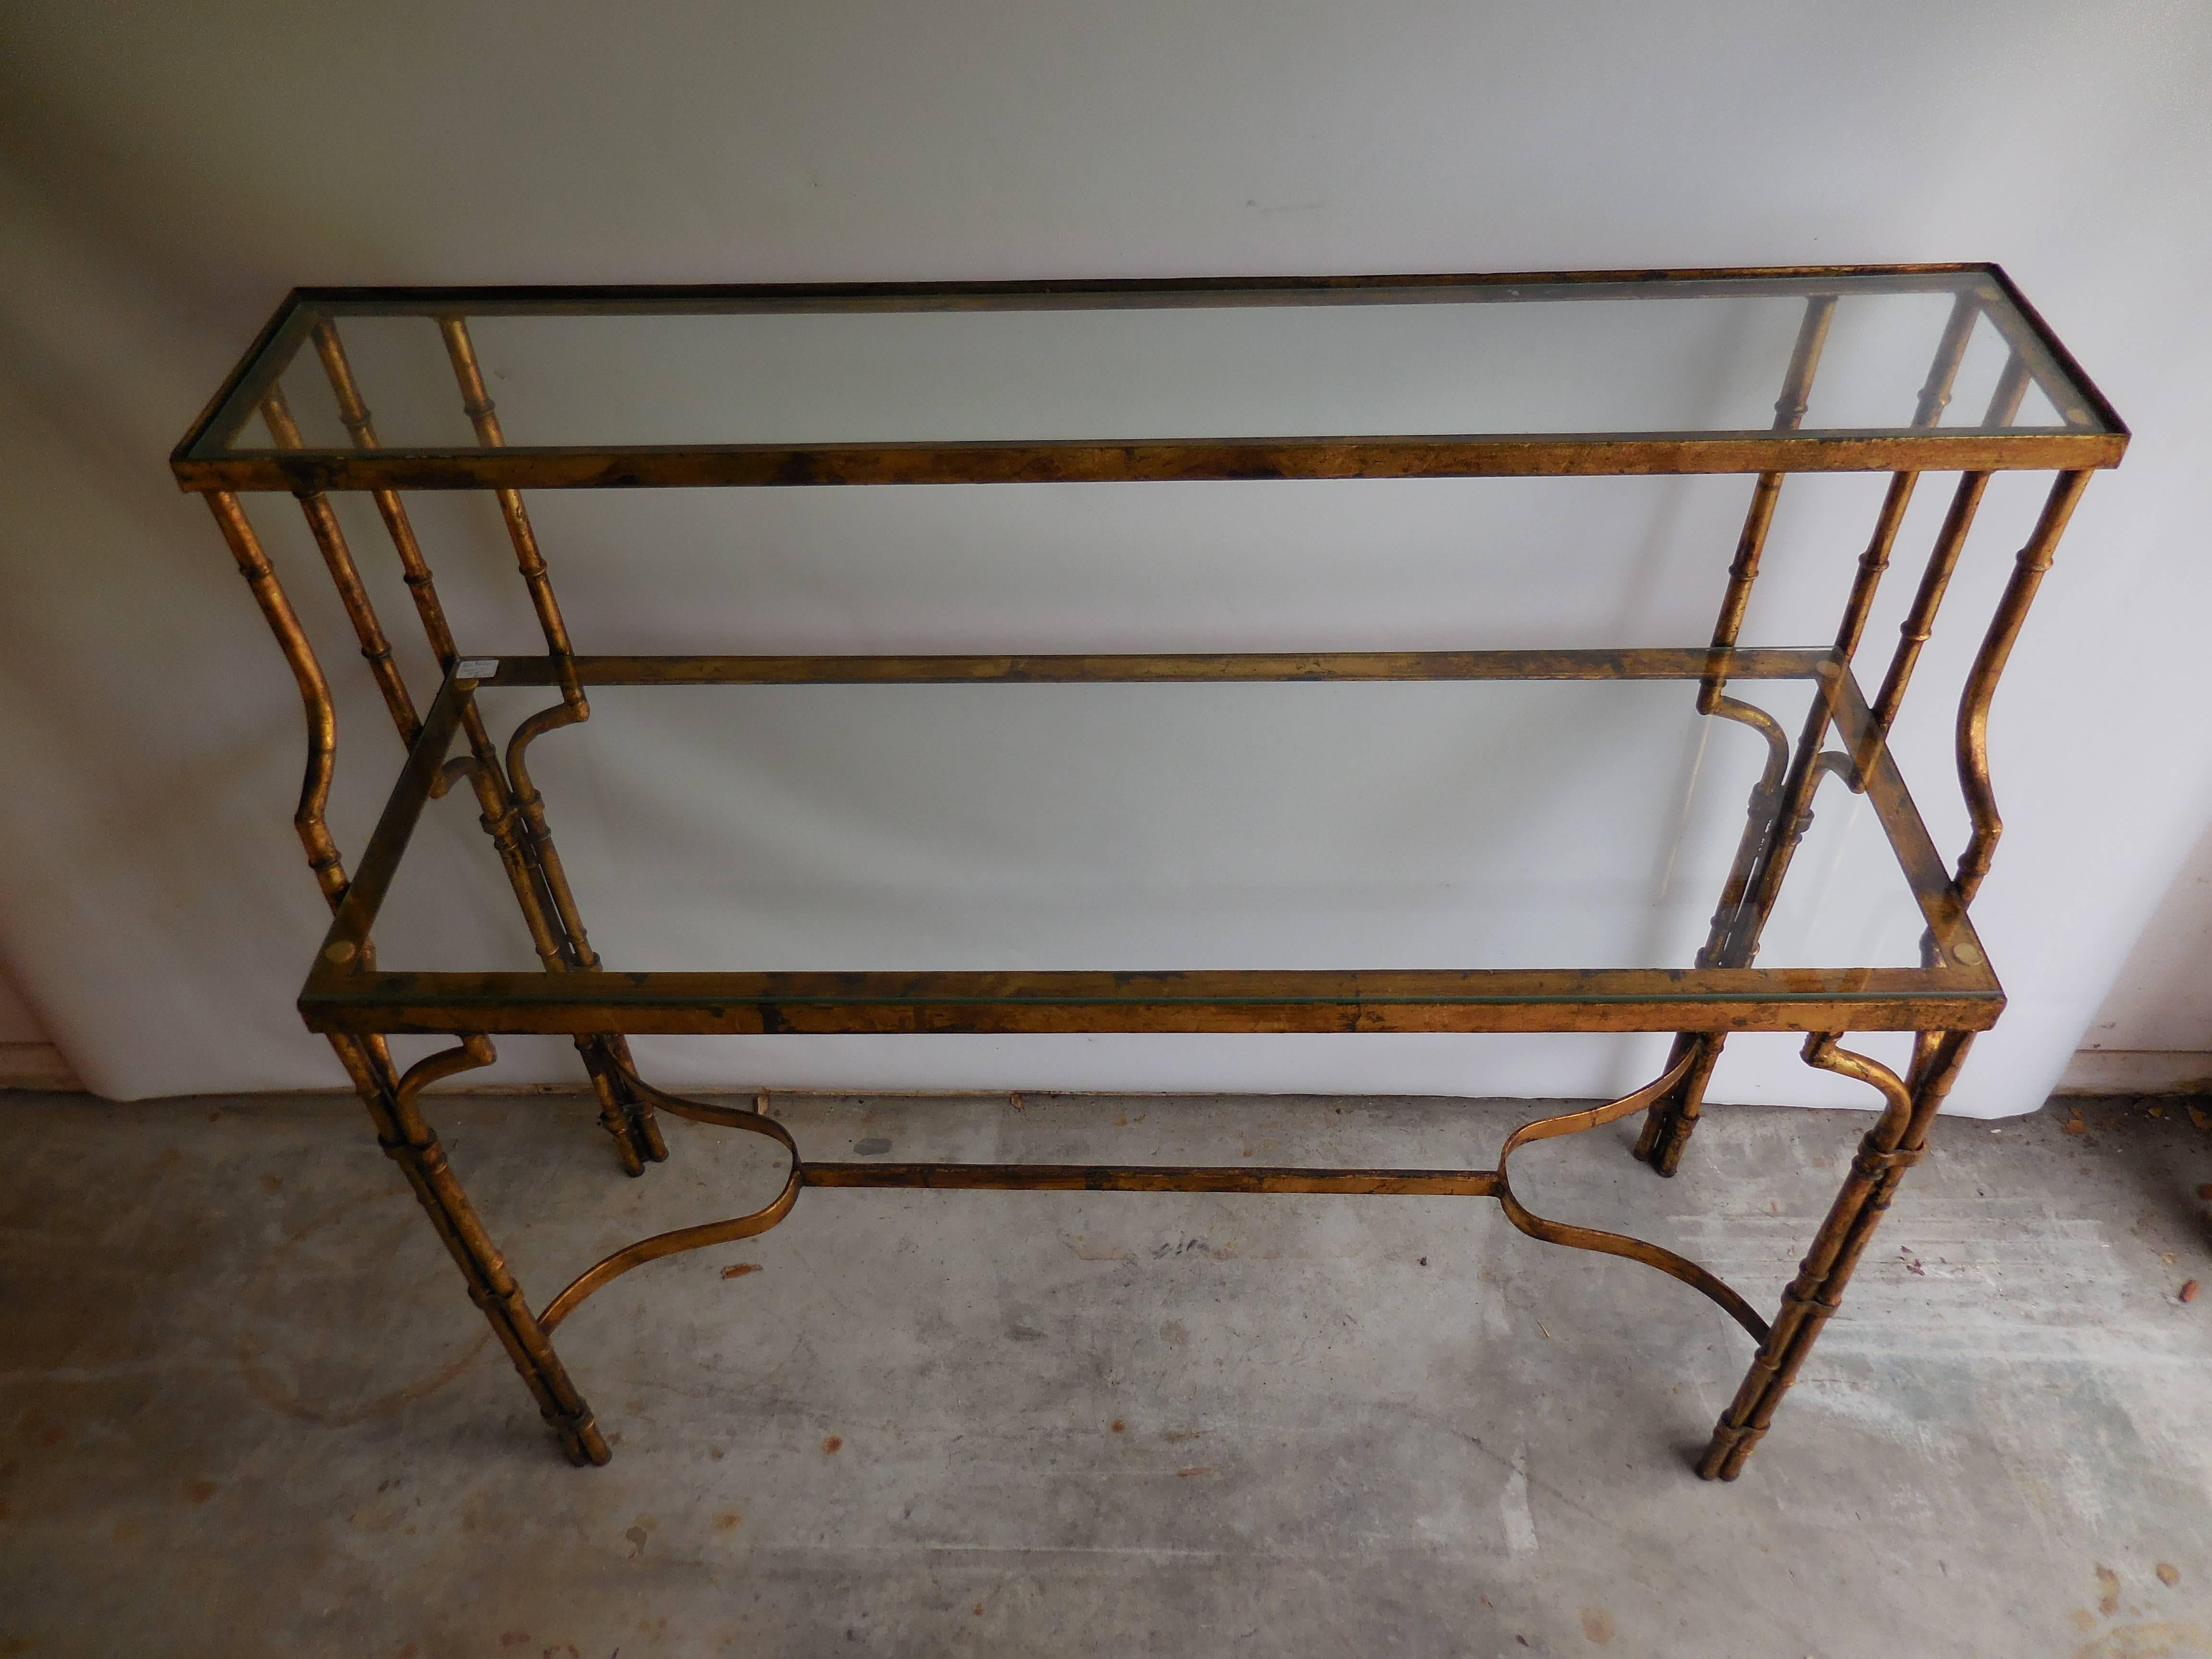 1950s Faux Bamboo Tiered Console In Excellent Condition For Sale In West Palm Beach, FL